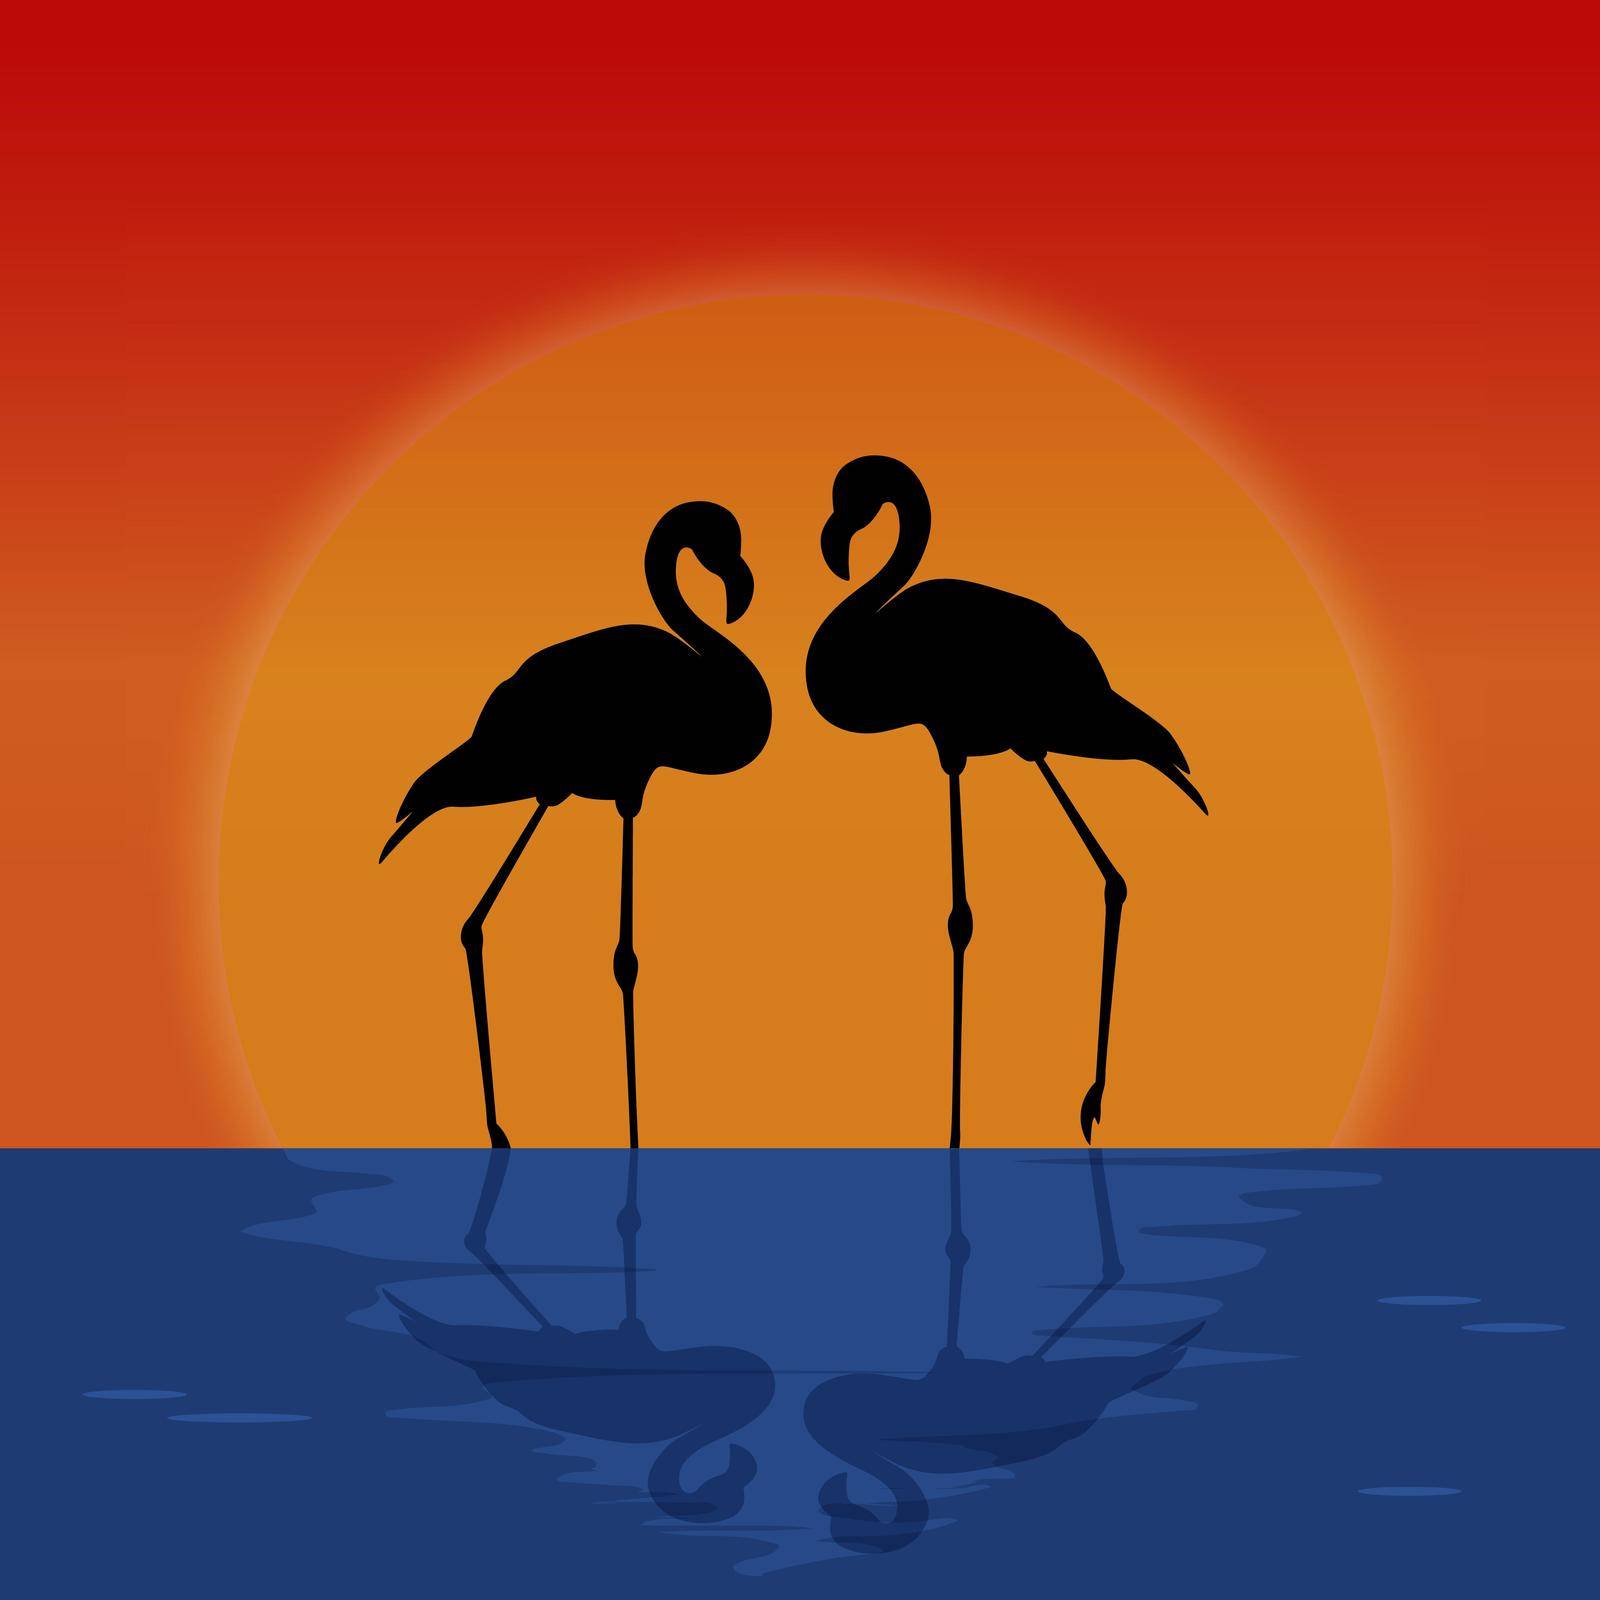 Silhouette pair of flamingos on sunset background. by TassiaK